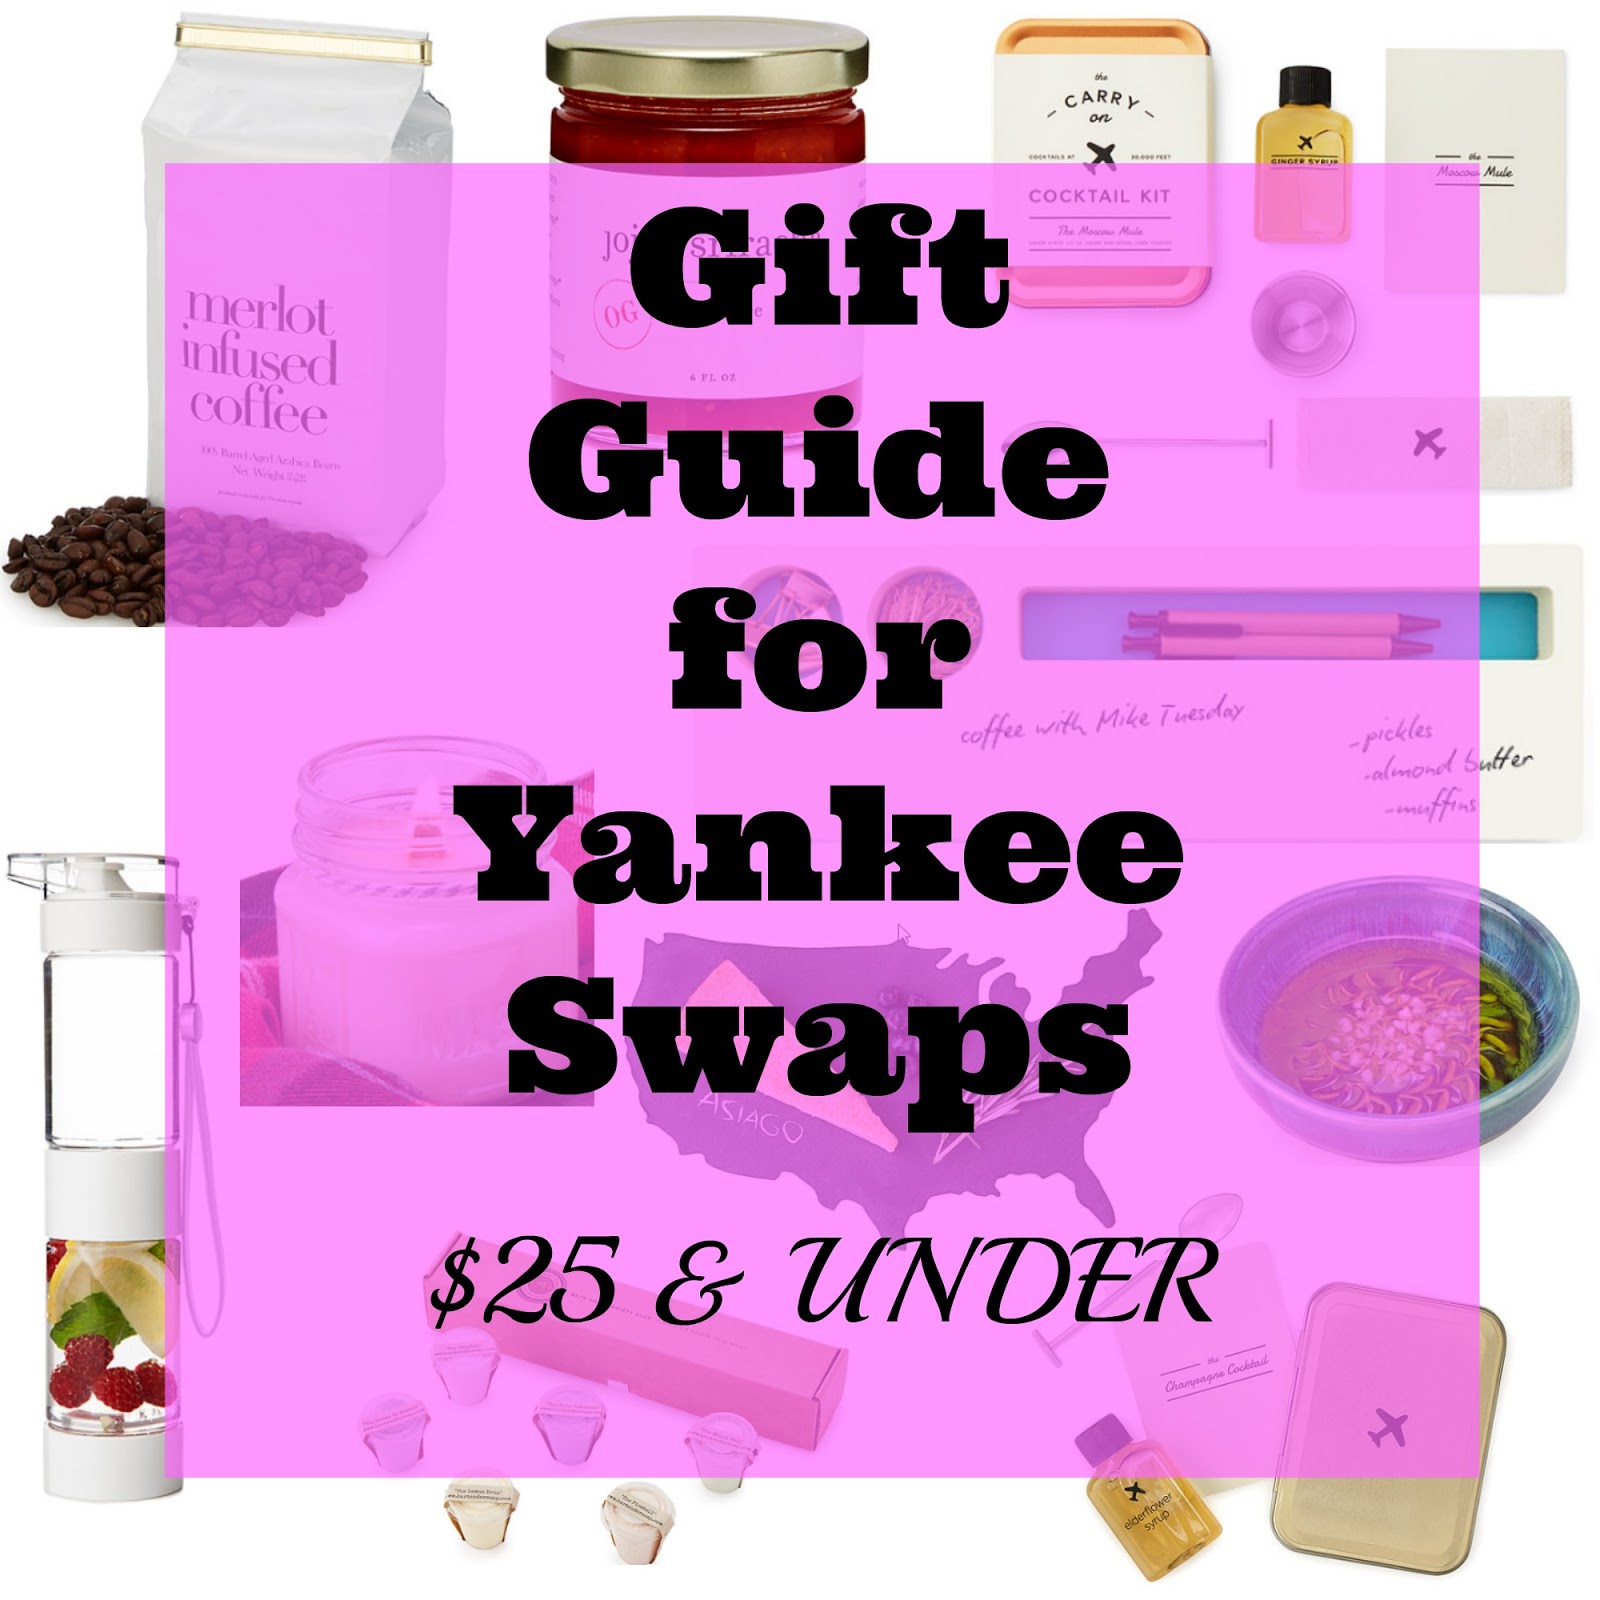 Gifts under 25 from uncommongoods